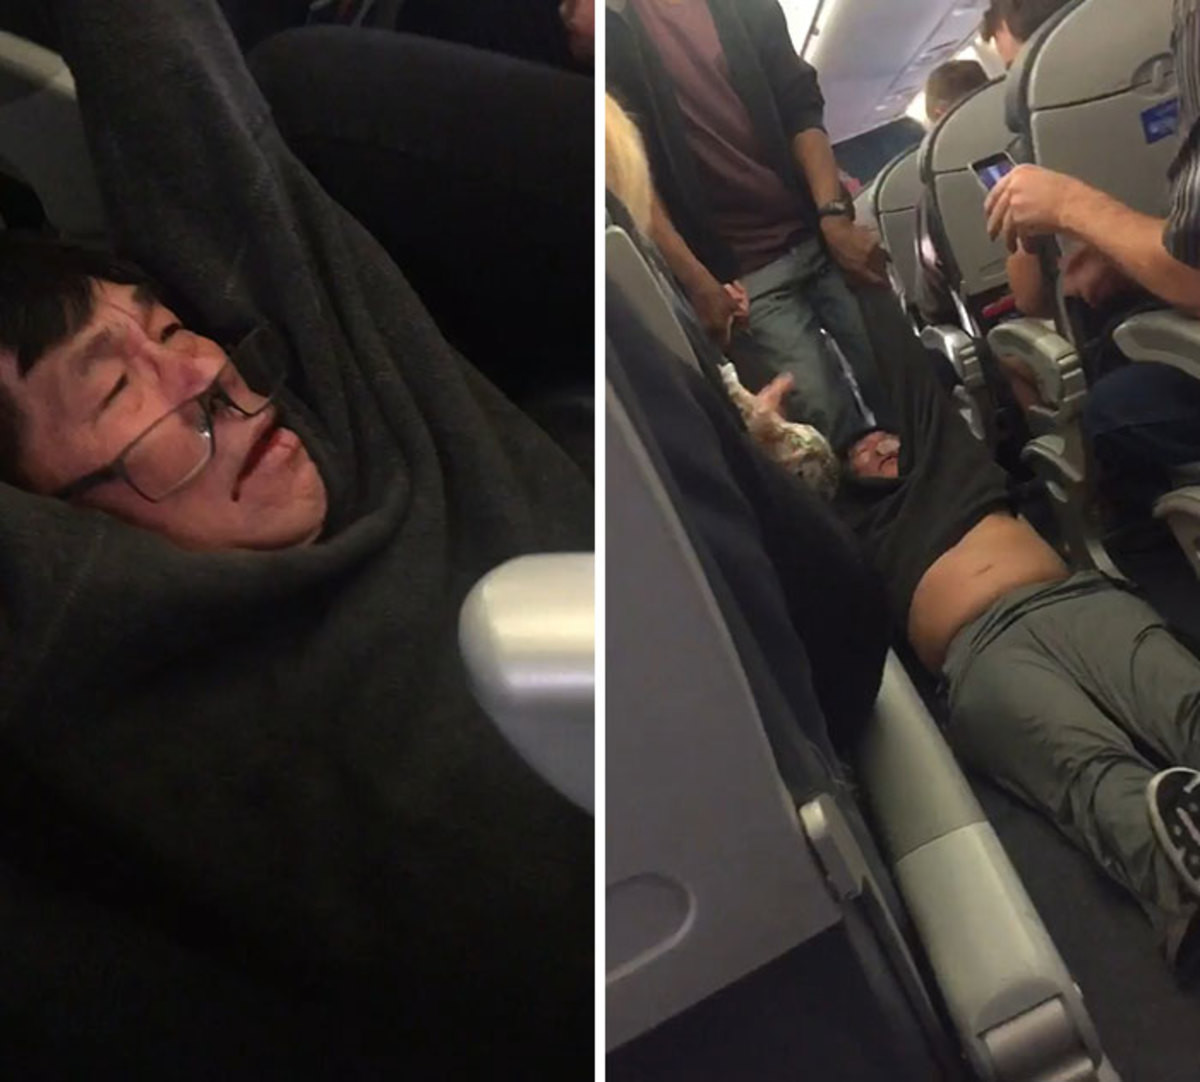 glamorous Moose. In 2017, a passenger was dragged across the aisle of a United Airlines flight. The cause of this was the flight was overbooked and when no one 